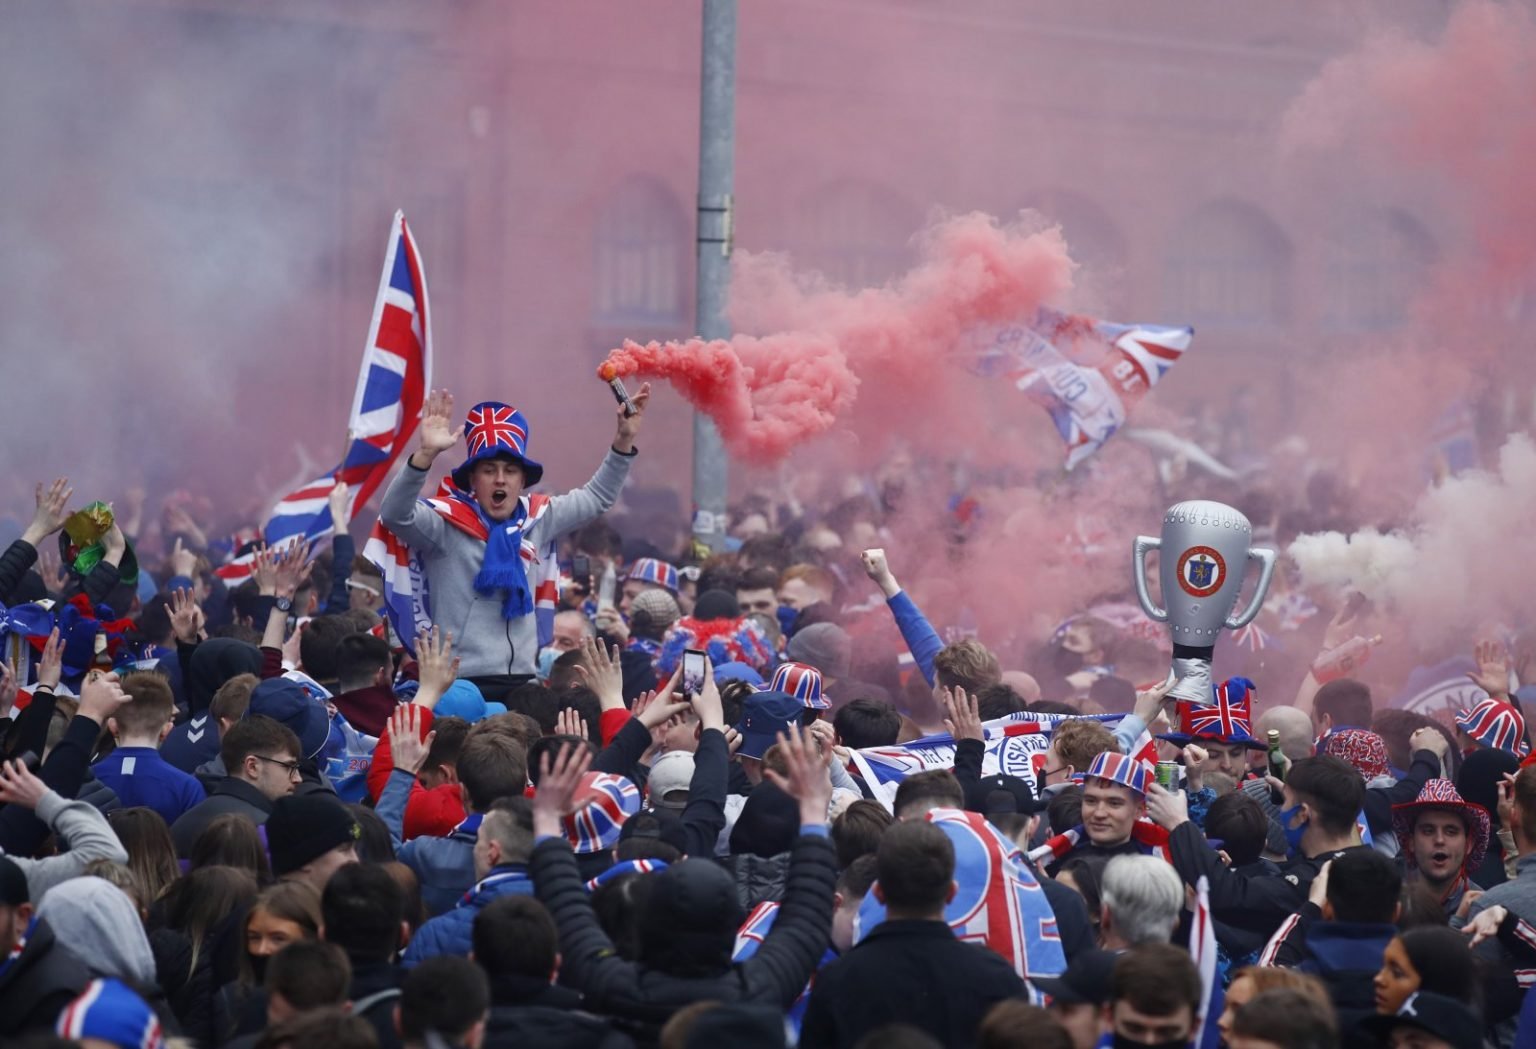 Glasgow City Council present Ibrox fans with £ 11,000 bill for George Squar...